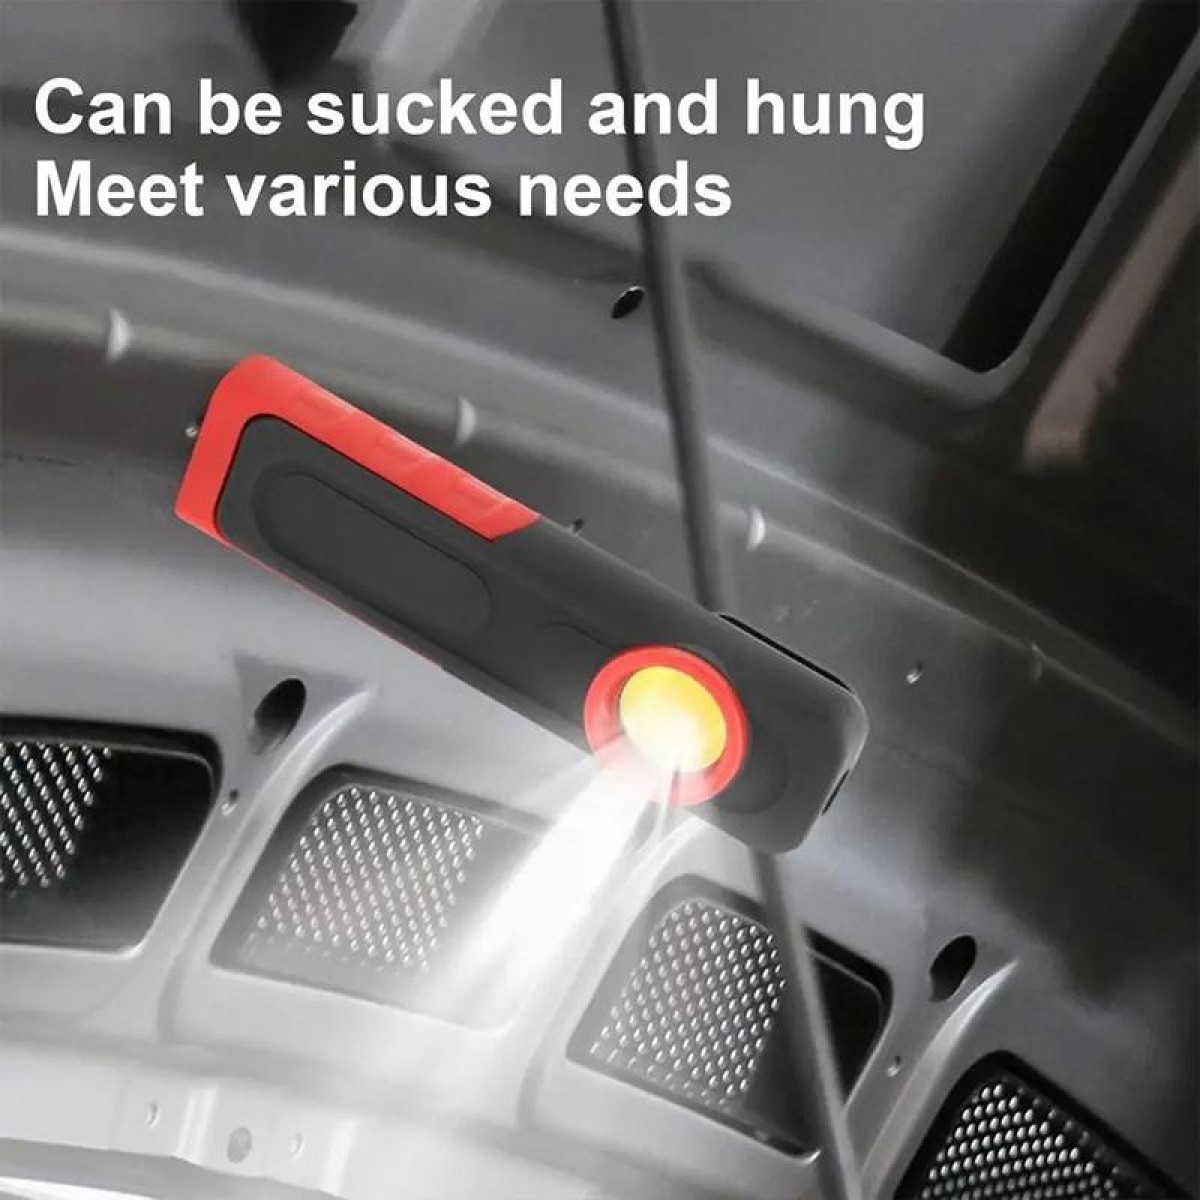 Car Portable USB Chargeable LED Work Inspection Light